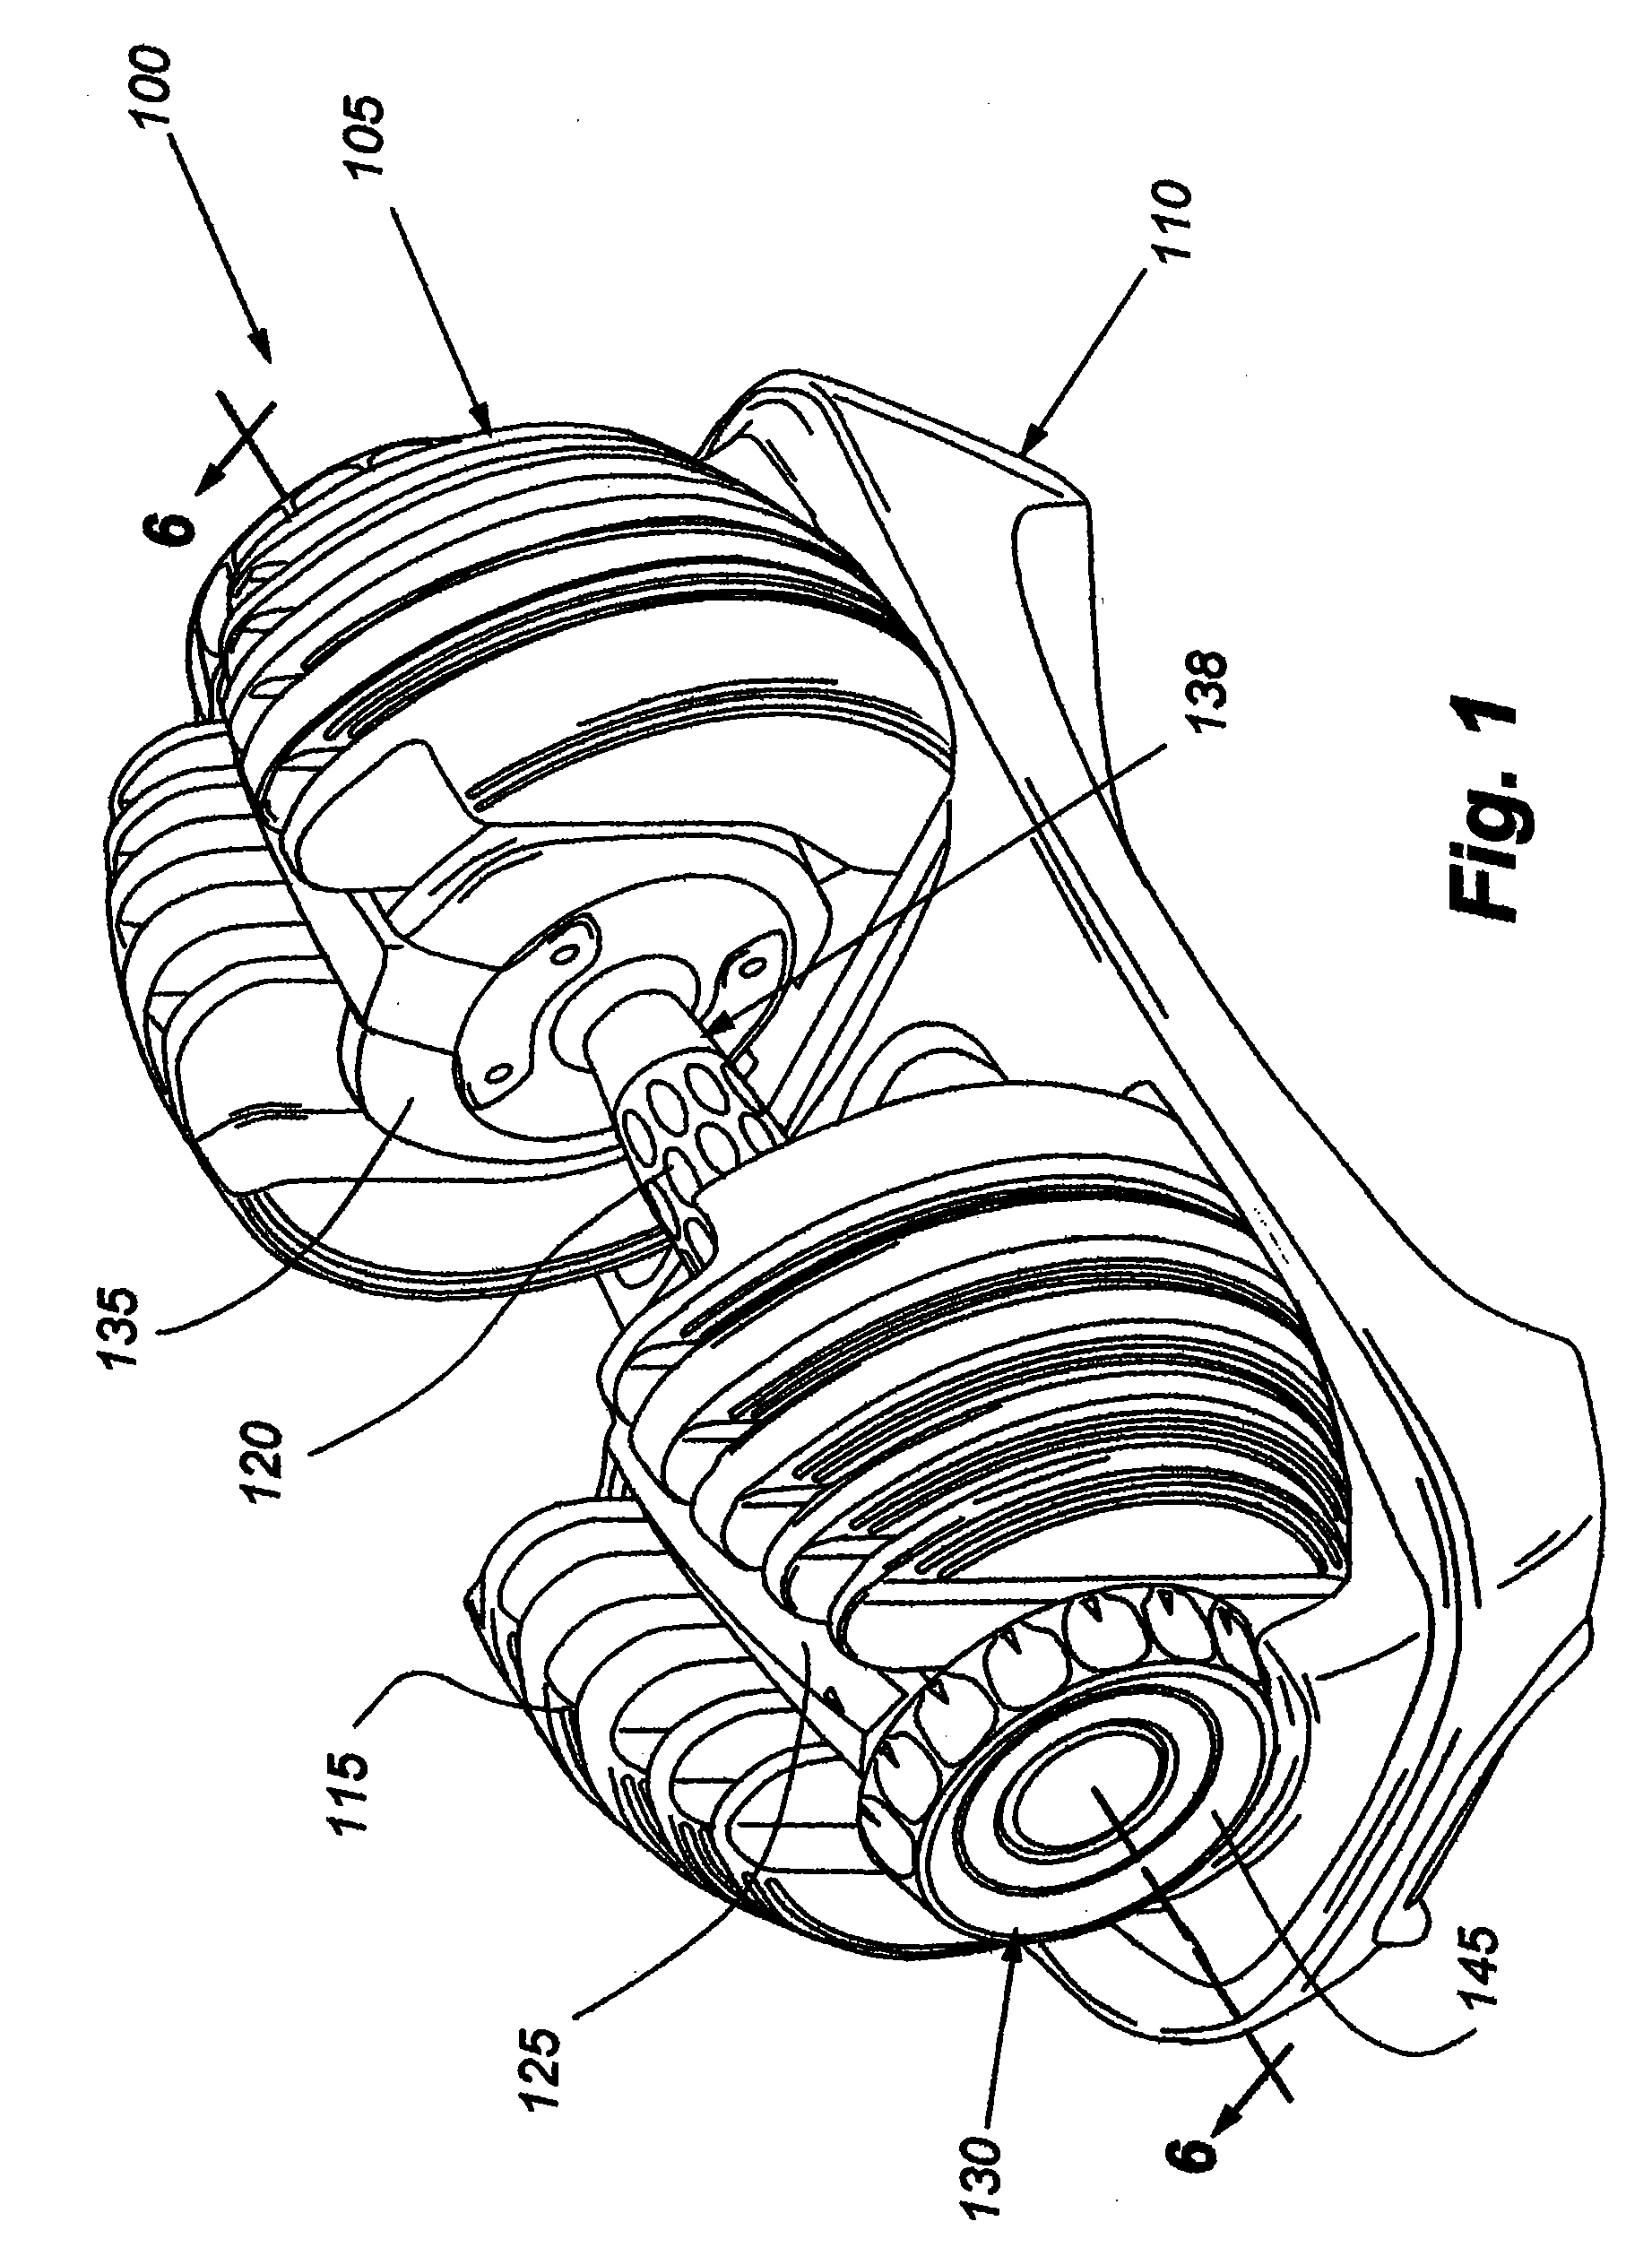 Adjustable dumbbell with an orientation feature